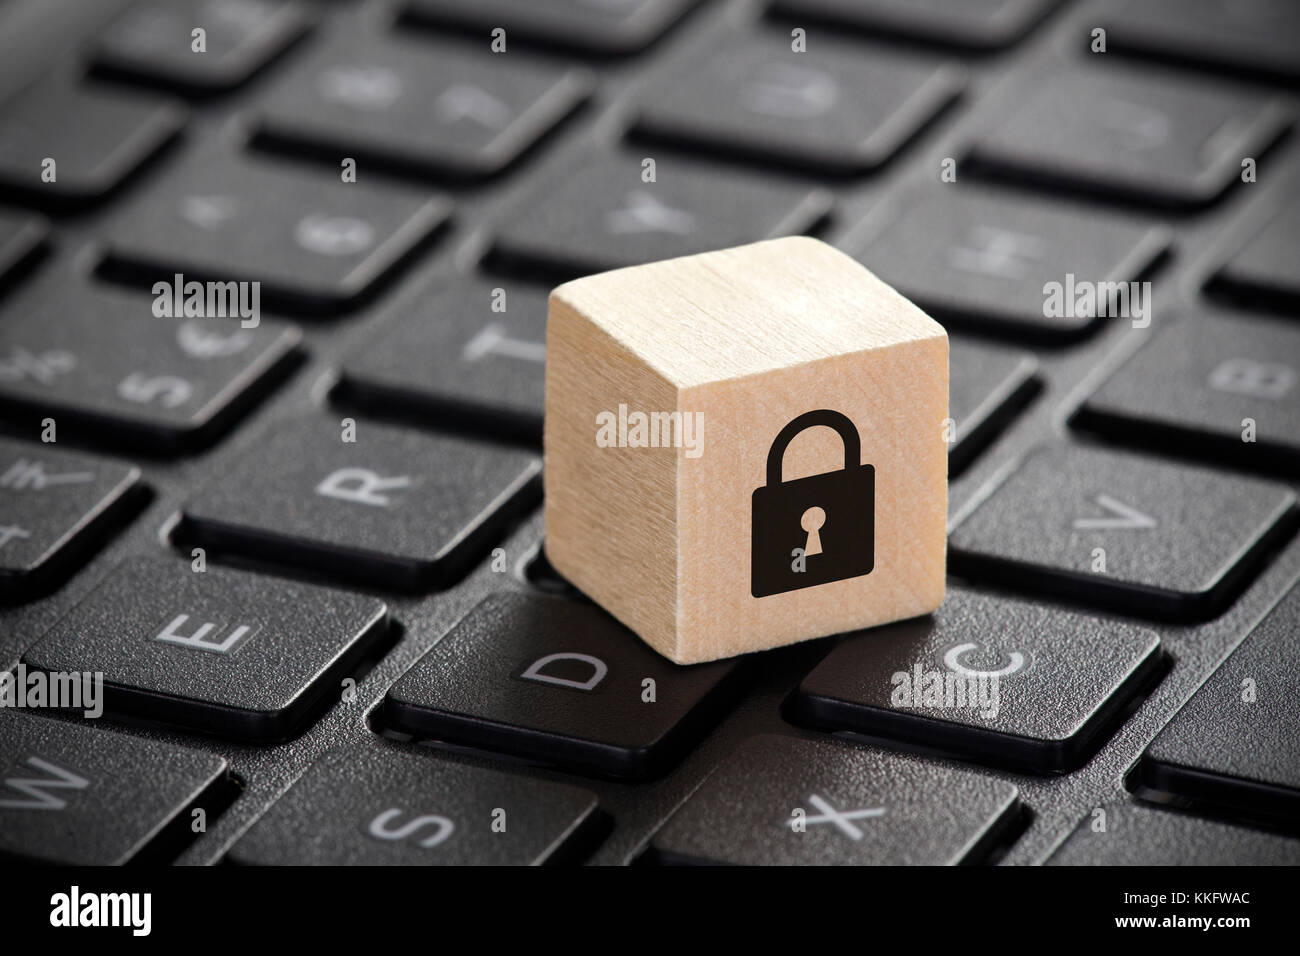 Wooden block with lock graphic on laptop keyboard. Computer security concept. Stock Photo